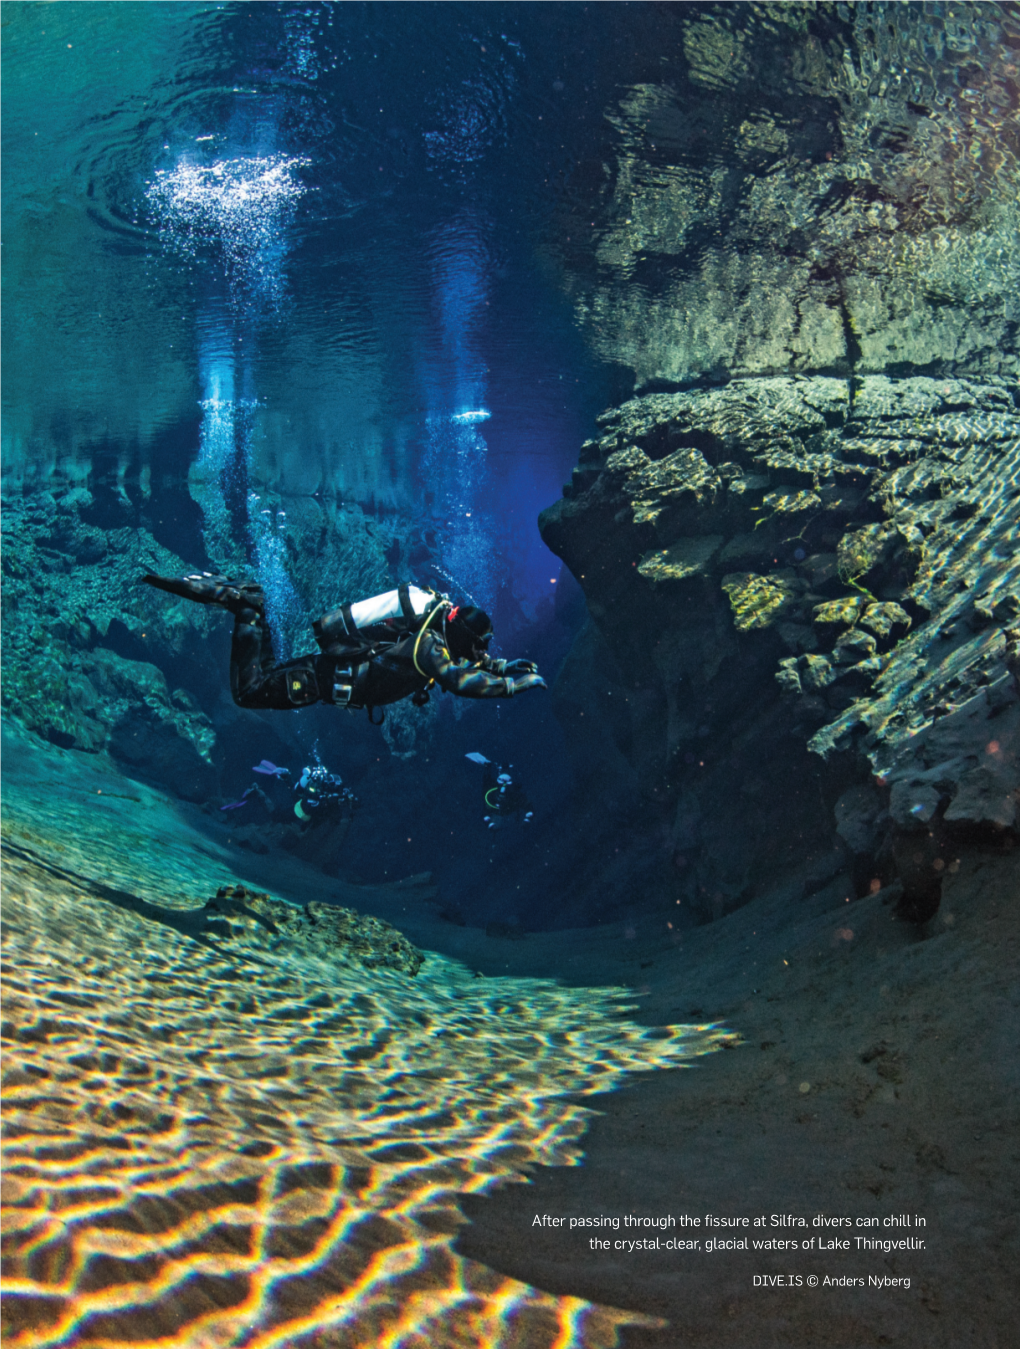 After Passing Through the Fissure at Silfra, Divers Can Chill in the Crystal-Clear, Glacial Waters of Lake Thingvellir